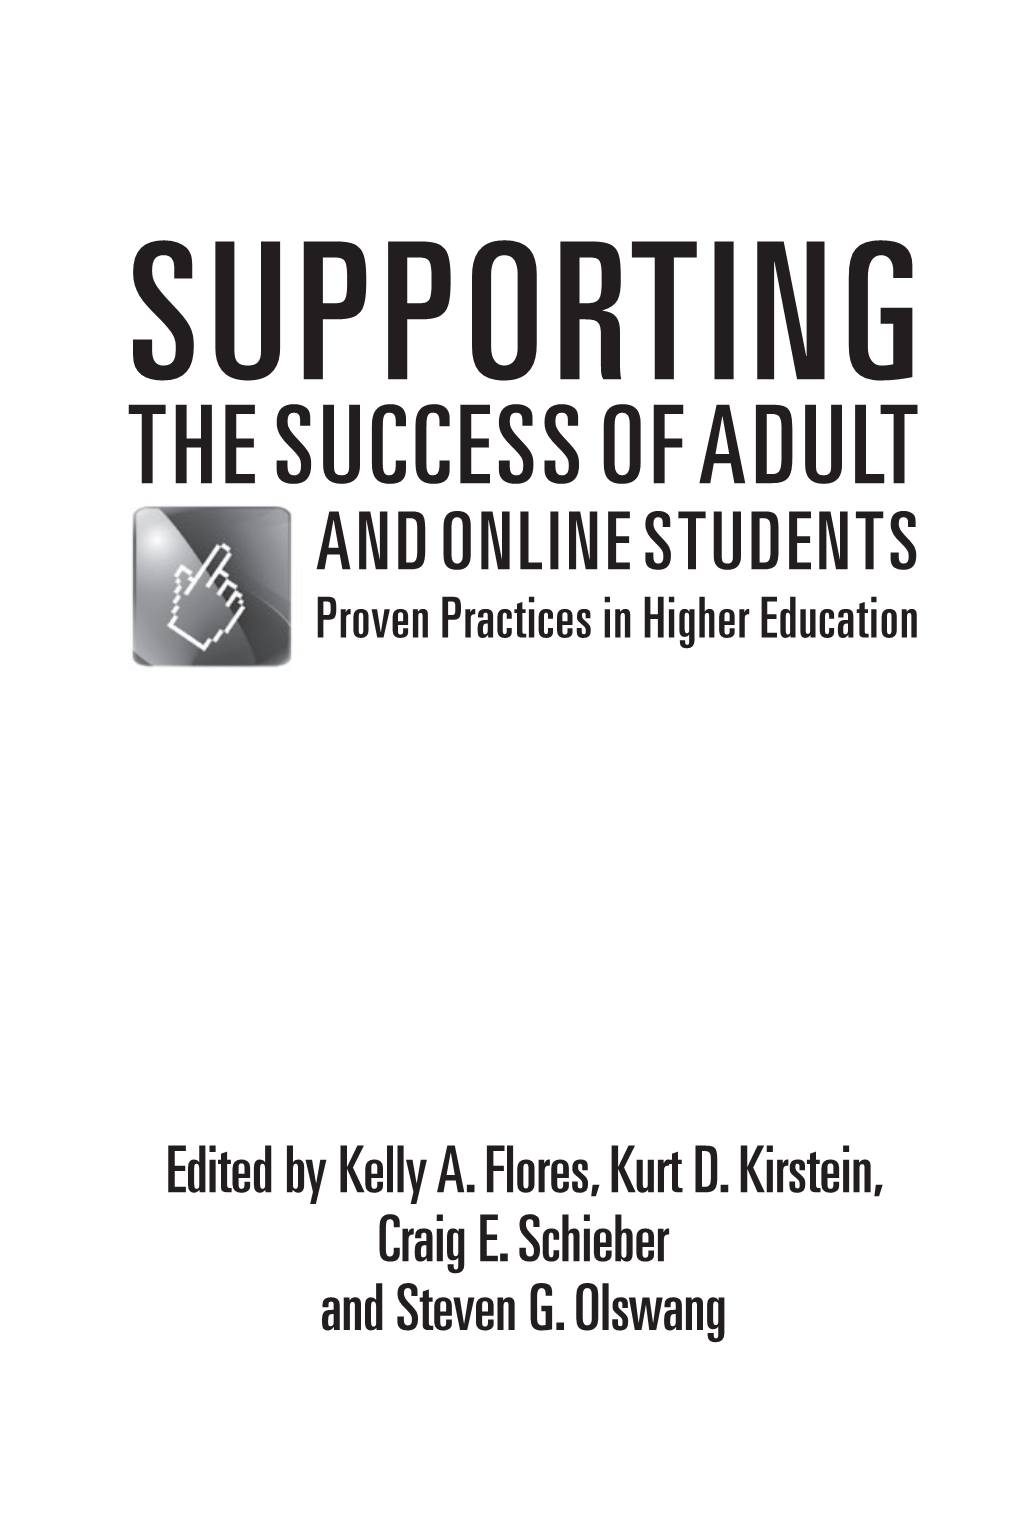 THE SUCCESS of ADULT and ONLINE STUDENTS Proven Practices in Higher Education